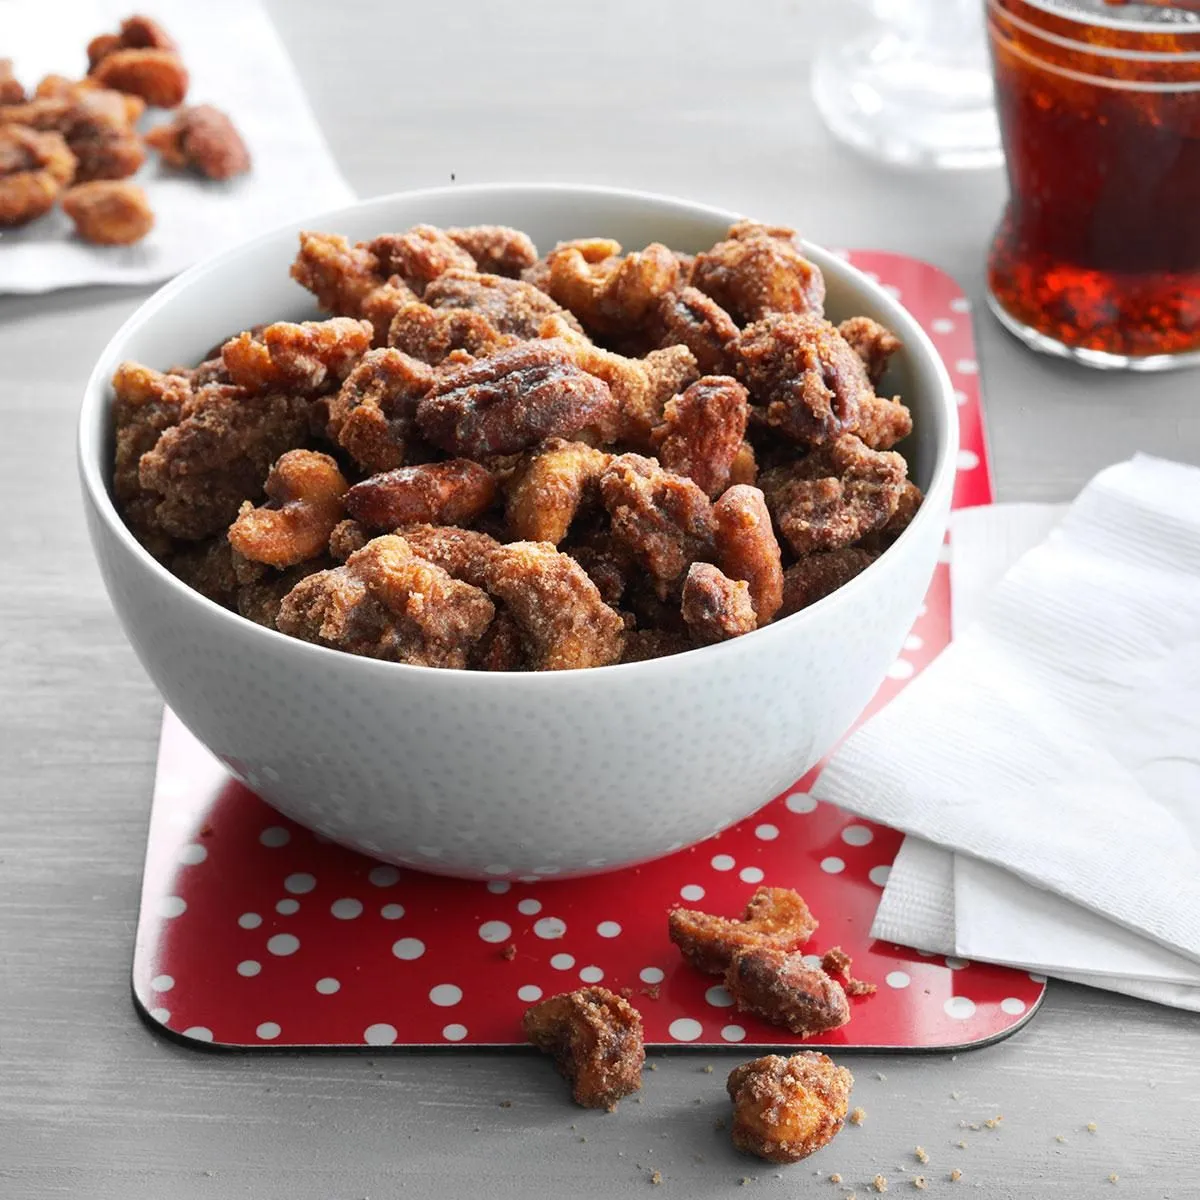 Slow Cooker Spicy Mixed Nuts Recipe